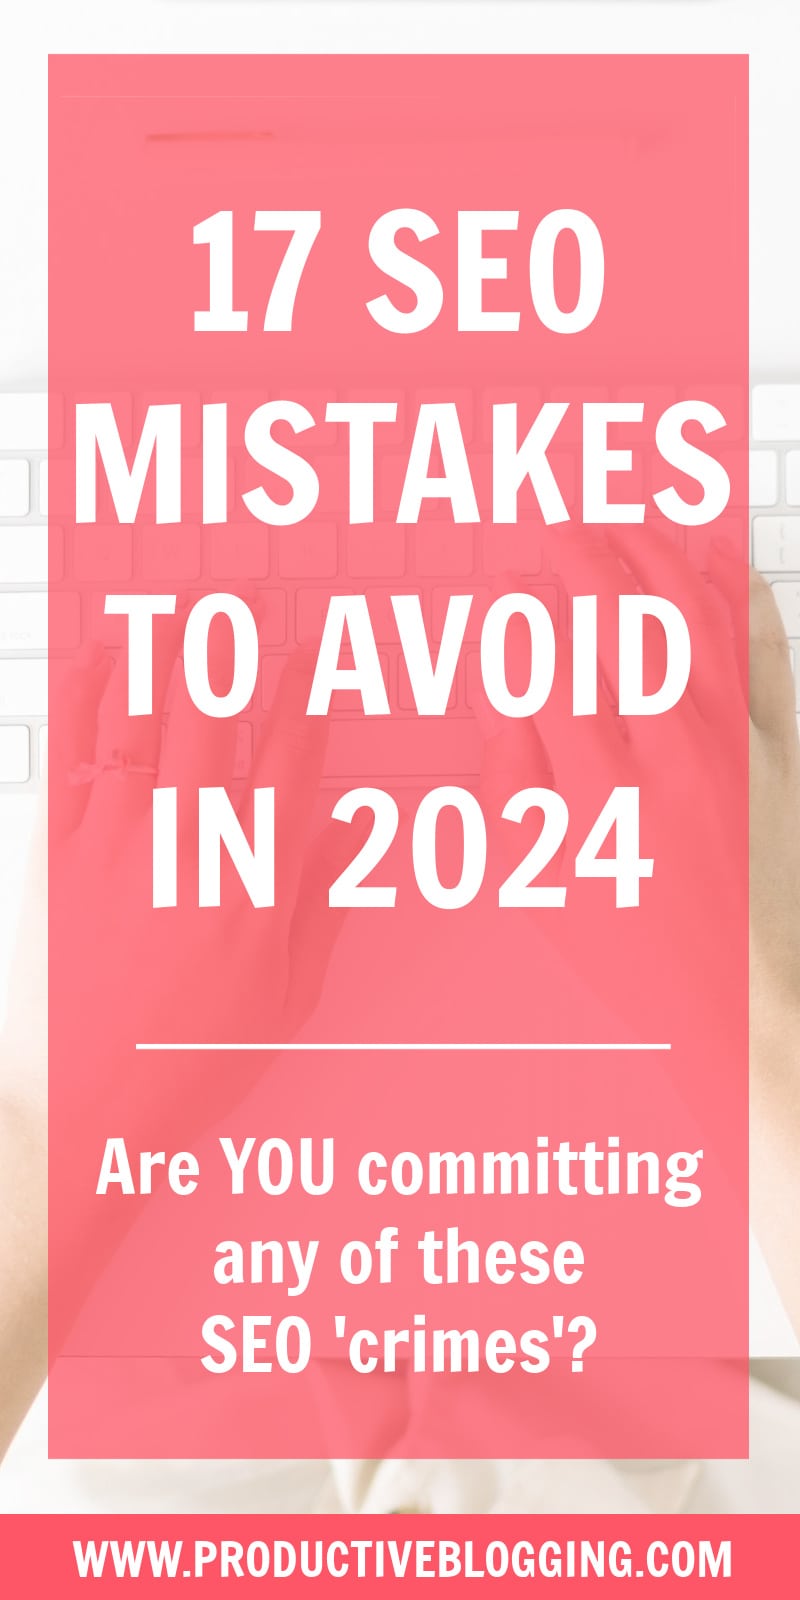 SEO is no longer optional for bloggers, it’s now an essential part of blogging – but are you doing it right? Make sure you are not making any of these 17 SEO mistakes to avoid in 2024… #SEO #SEOtips #SEOmistakes #SEOhacks #bloggingtips #blogging #bloggingmistakes #bloggermistakes #blogginghacks #bloggingSEO #SEOforbloggers #productiveblogging